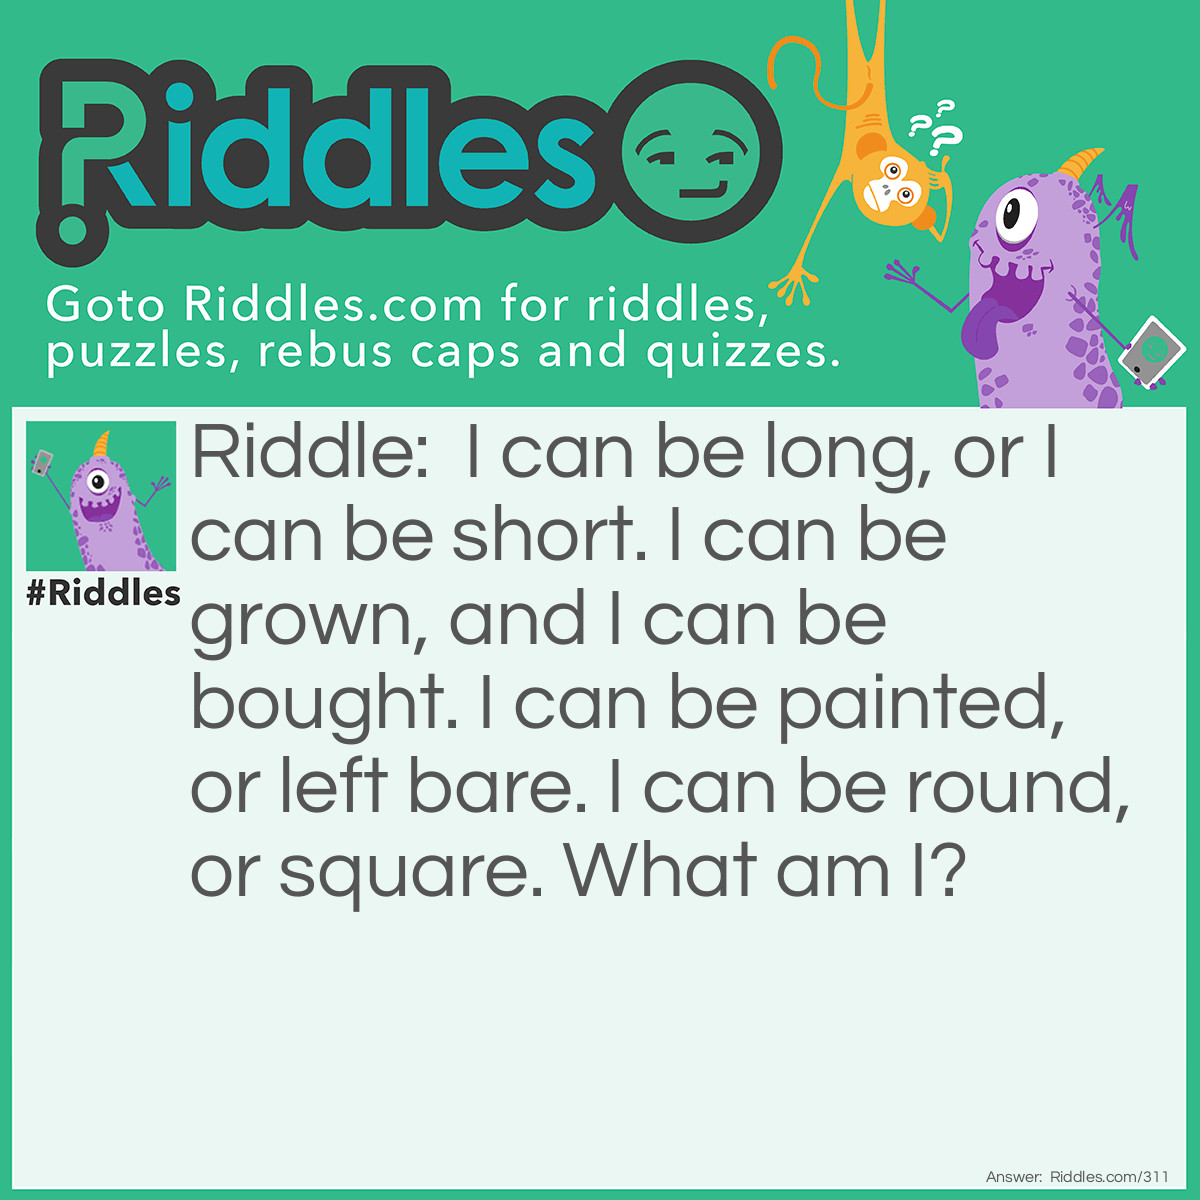 Riddle: I can be long, or I can be short. I can be grown, and I can be bought. I can be painted, or left bare. I can be round, or square. What am I? Answer: Your fingernails.